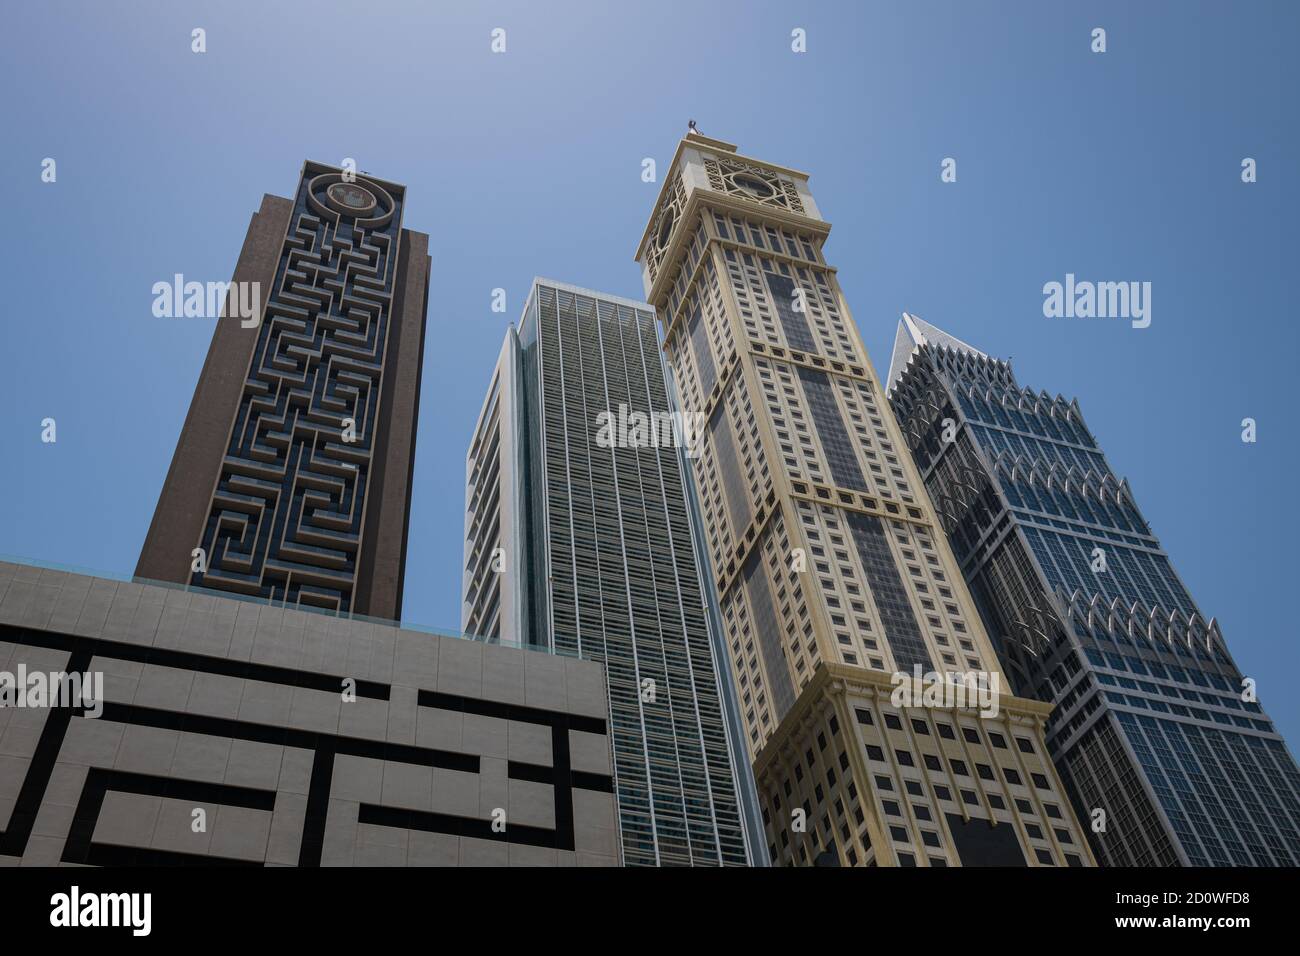 Skyscrapers on Sheikh Zayed Road between Financial Centre and Emirates Towers metro stations, Dubai, United Arab Emirates Stock Photo